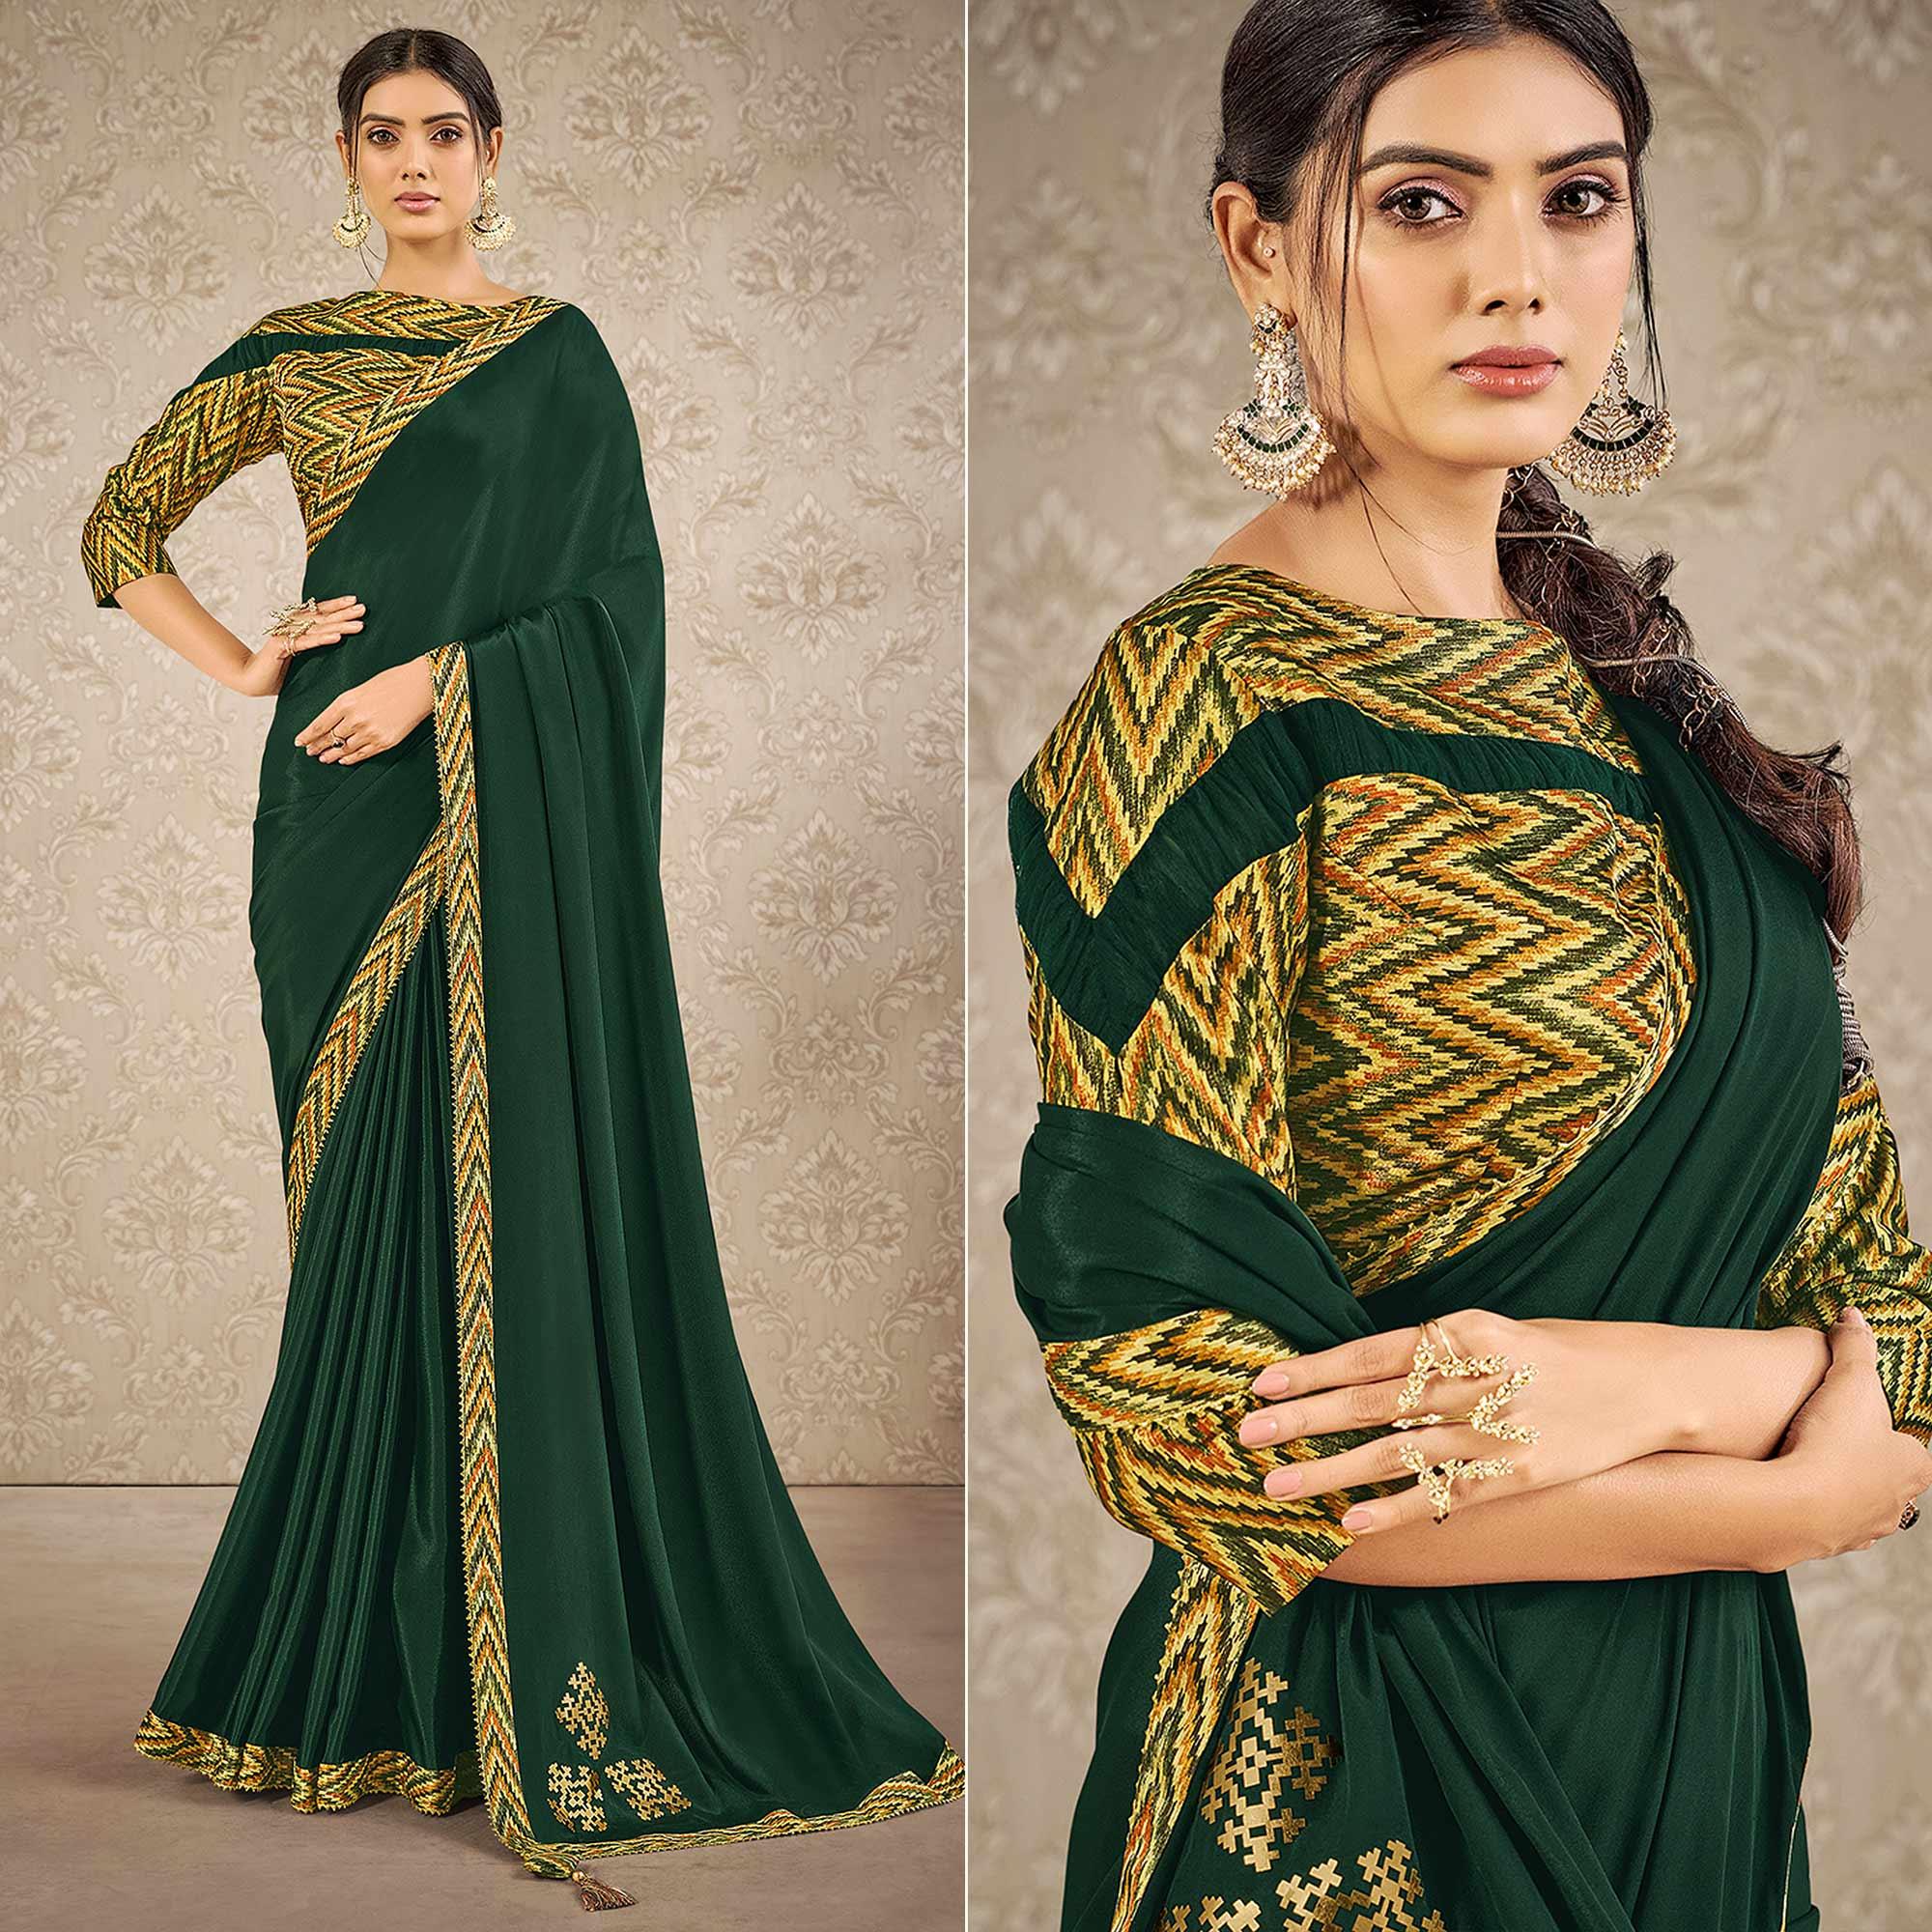 Green Partywear Appliqued With Digital Printed Satin Saree - Peachmode